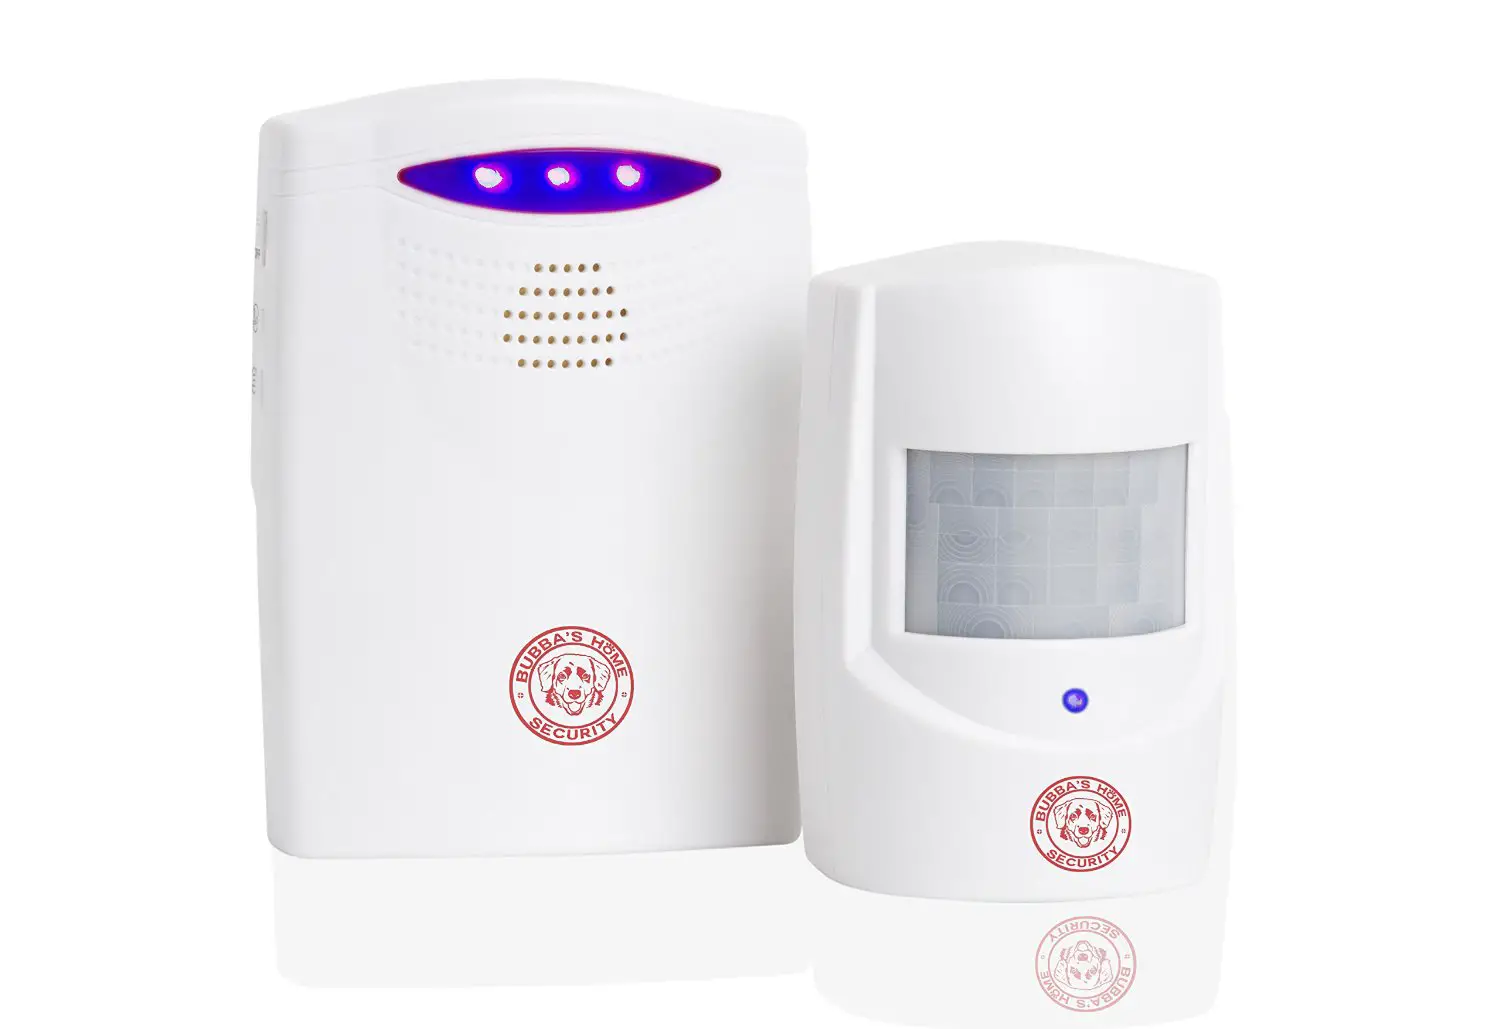 Top 5 Wireless Motion Sensor And, Outdoor Wireless Motion Detector Alarm Sound